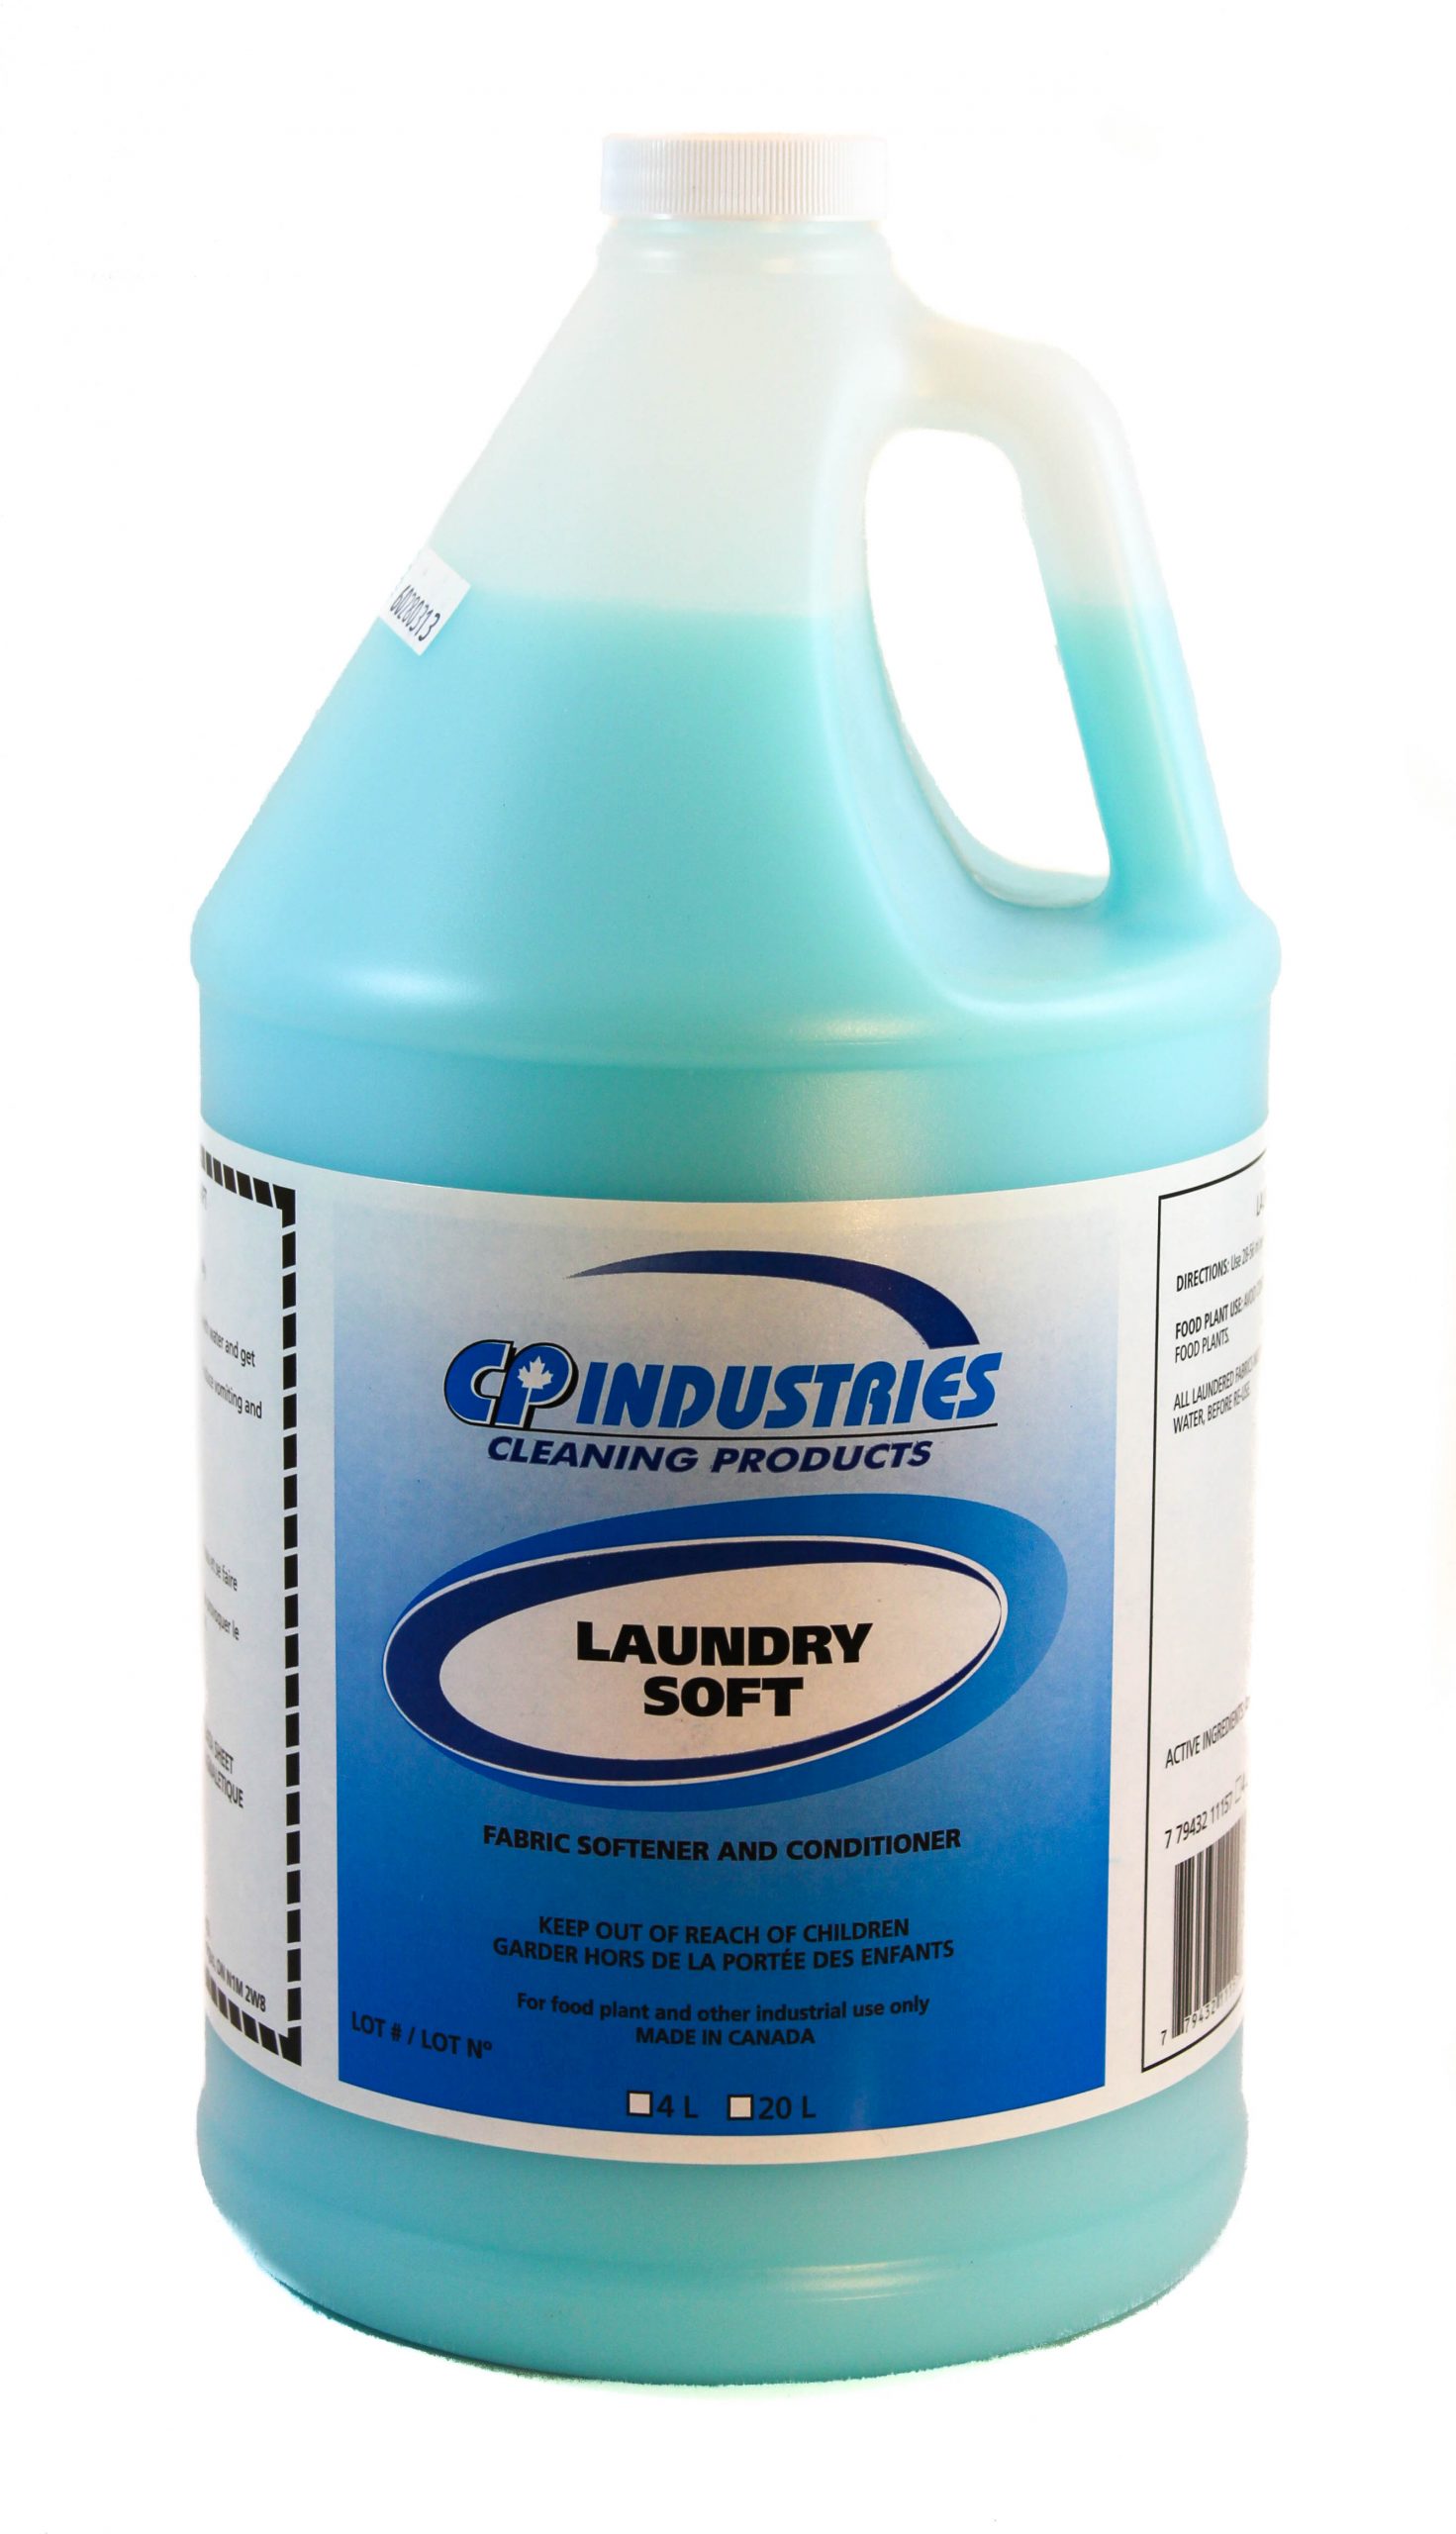 CP Industries Laundry Soft